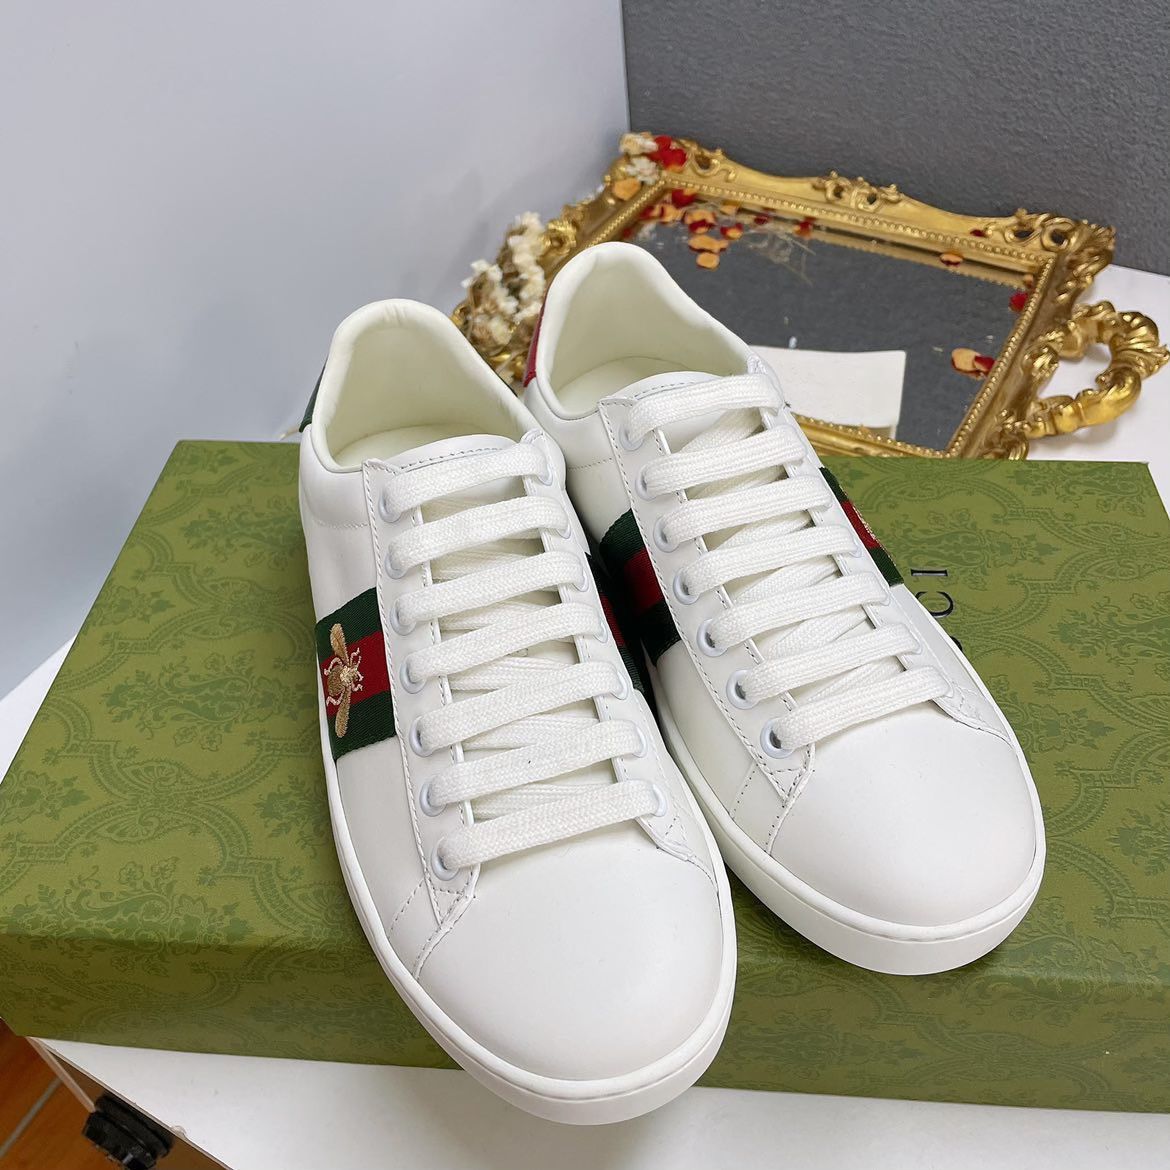 New Gucci Bee Embroidered Sneakers for Sale in Tracy, - OfferUp